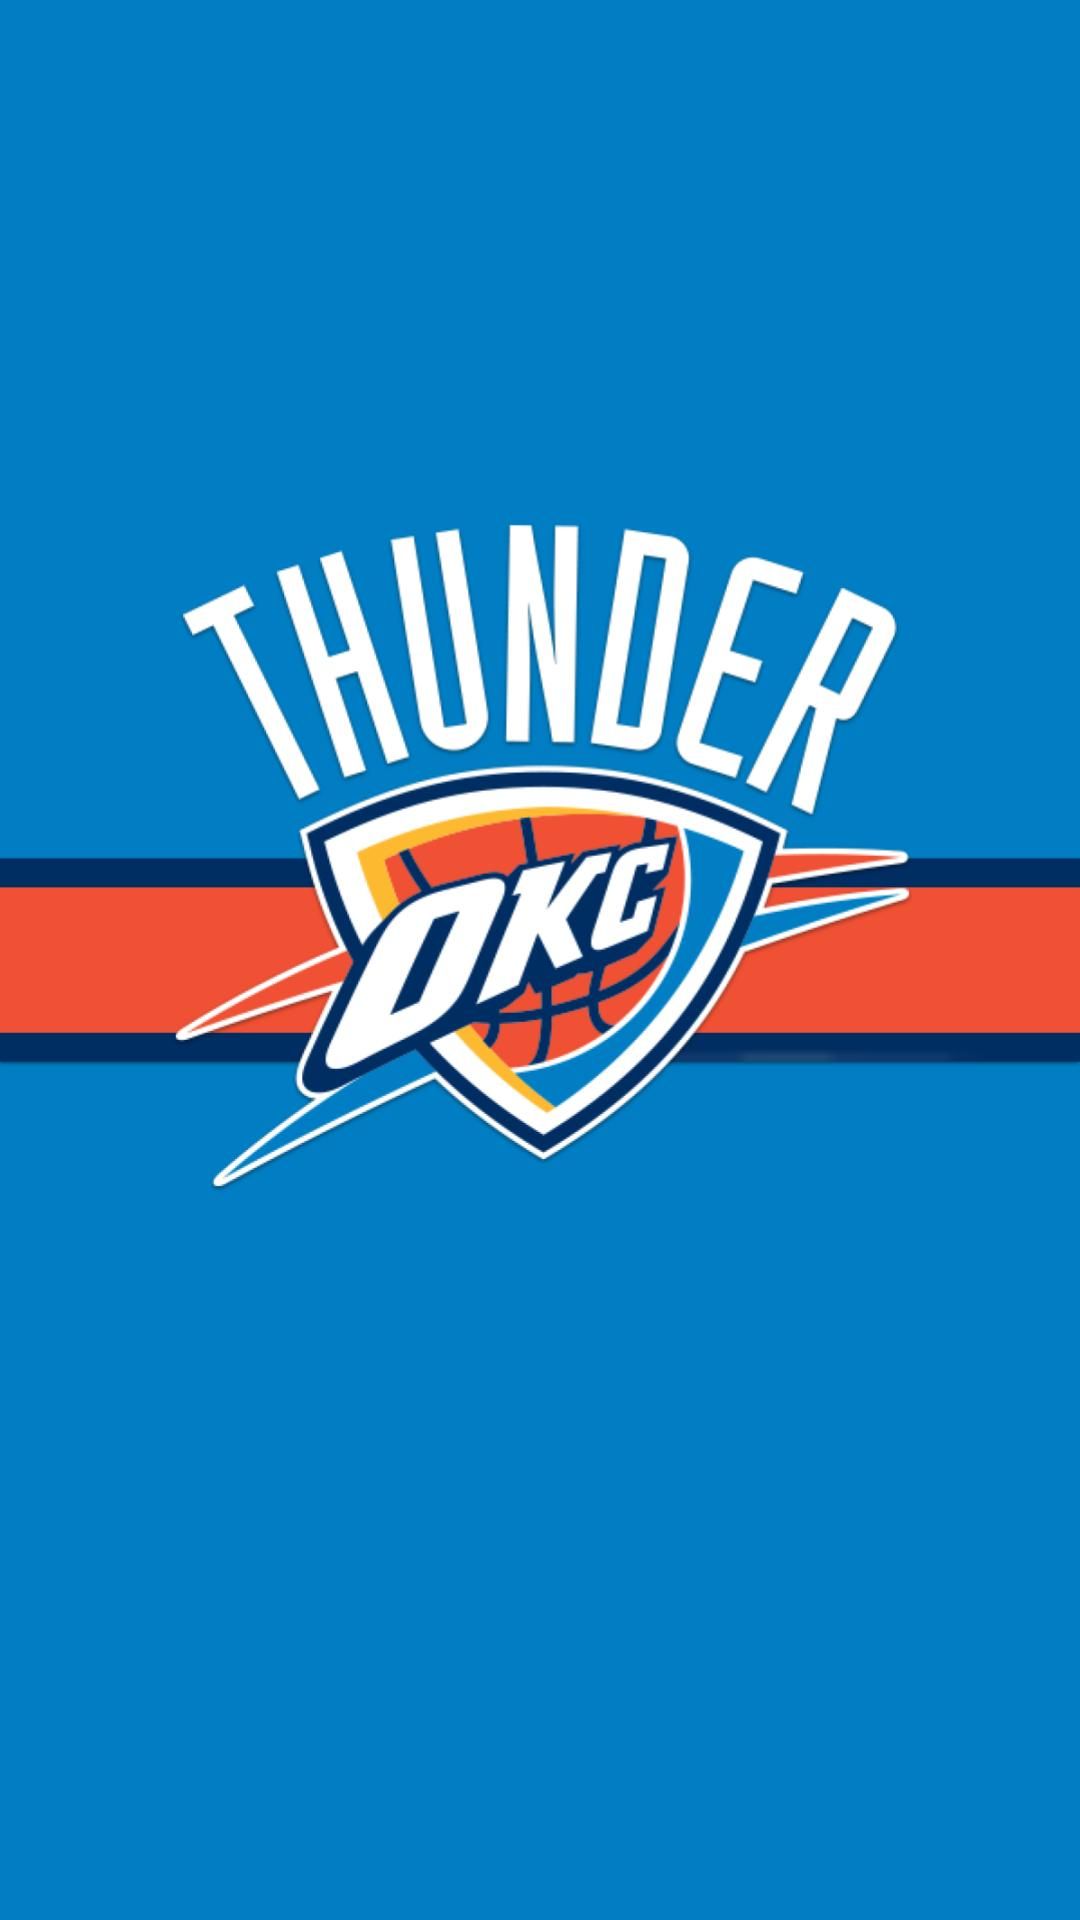 Here's a thunder wallpaper I made for my phone, wanted to keep it